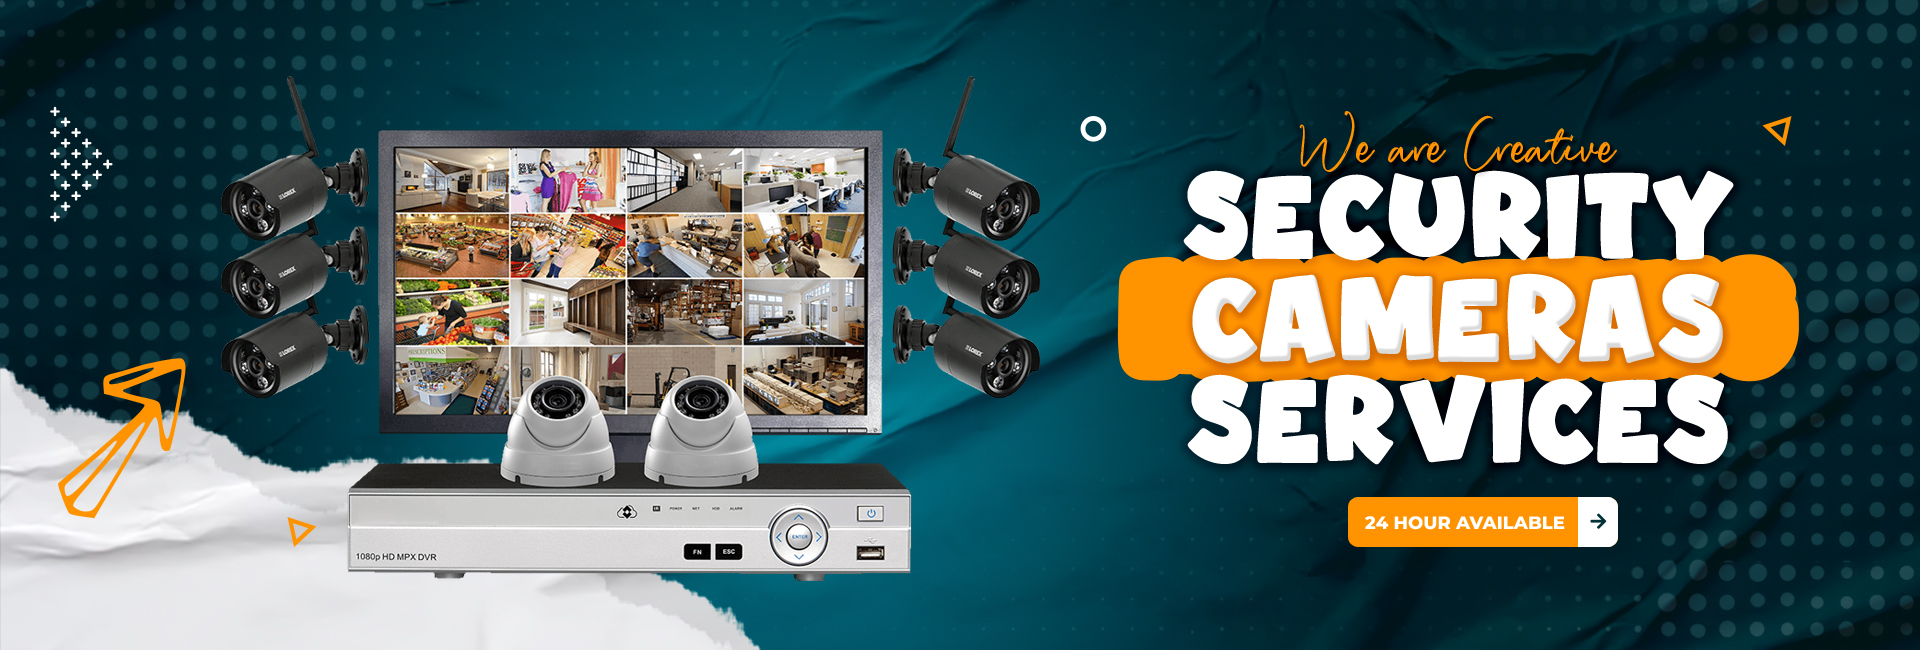 Security Cameras Services In Sialkot Pakistan